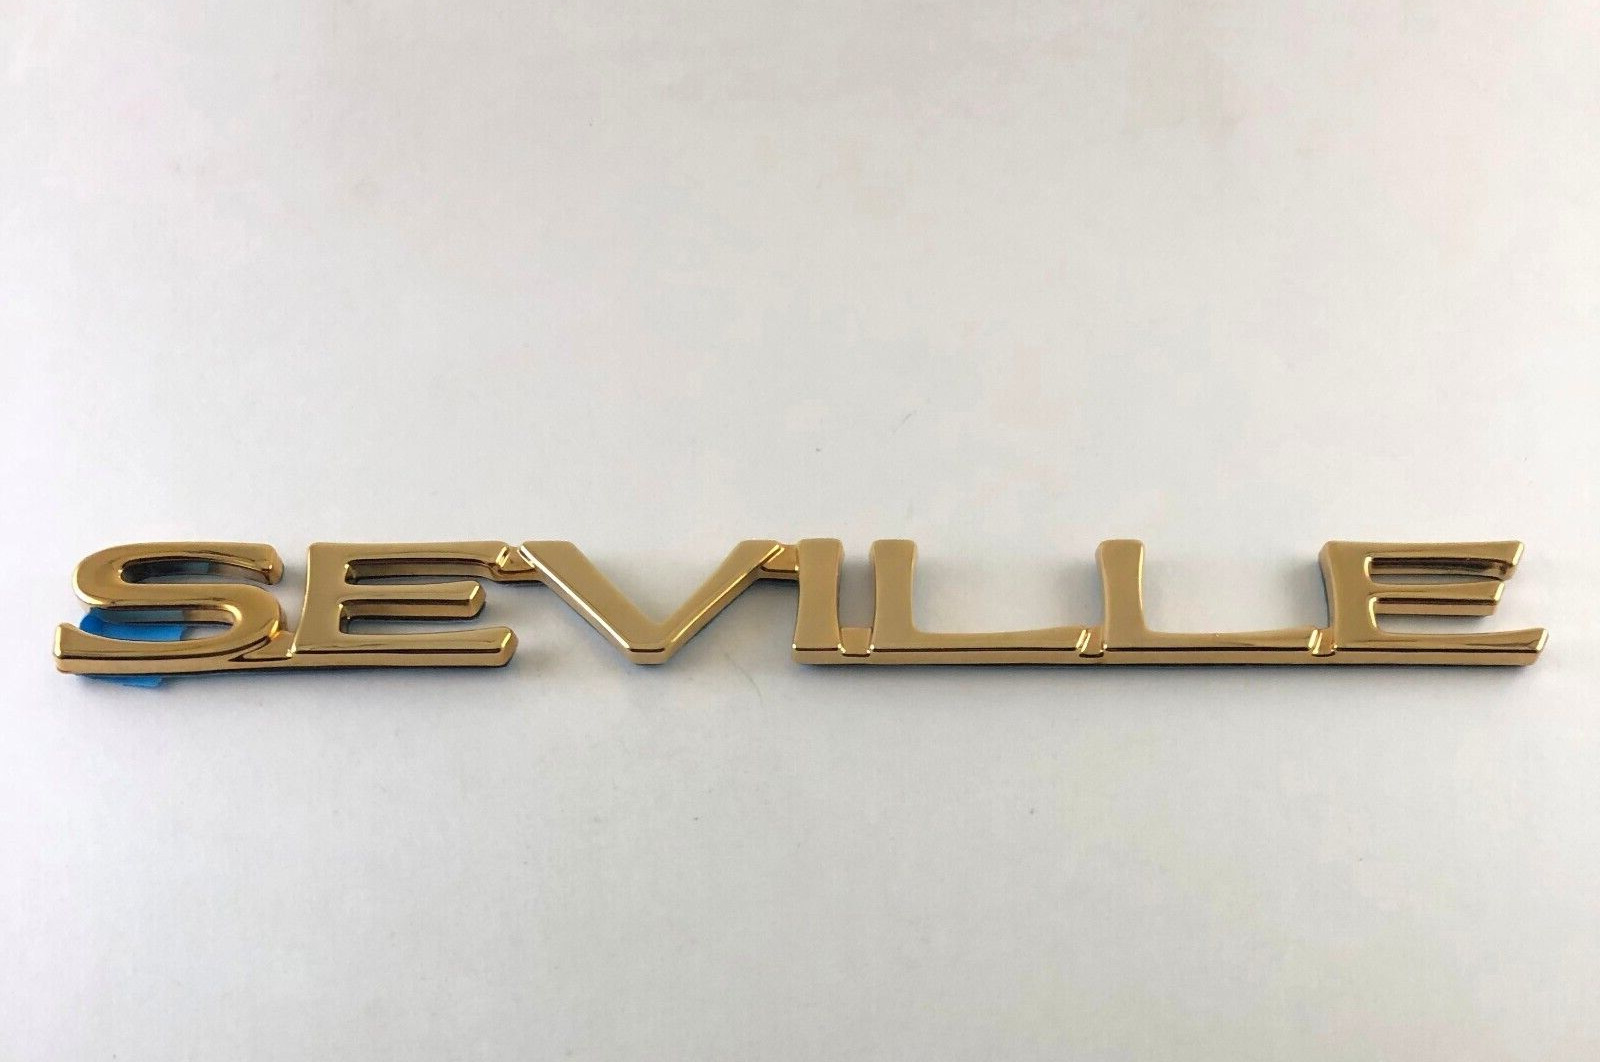 Cadillac SEVILLE emblem gold plated new GM part